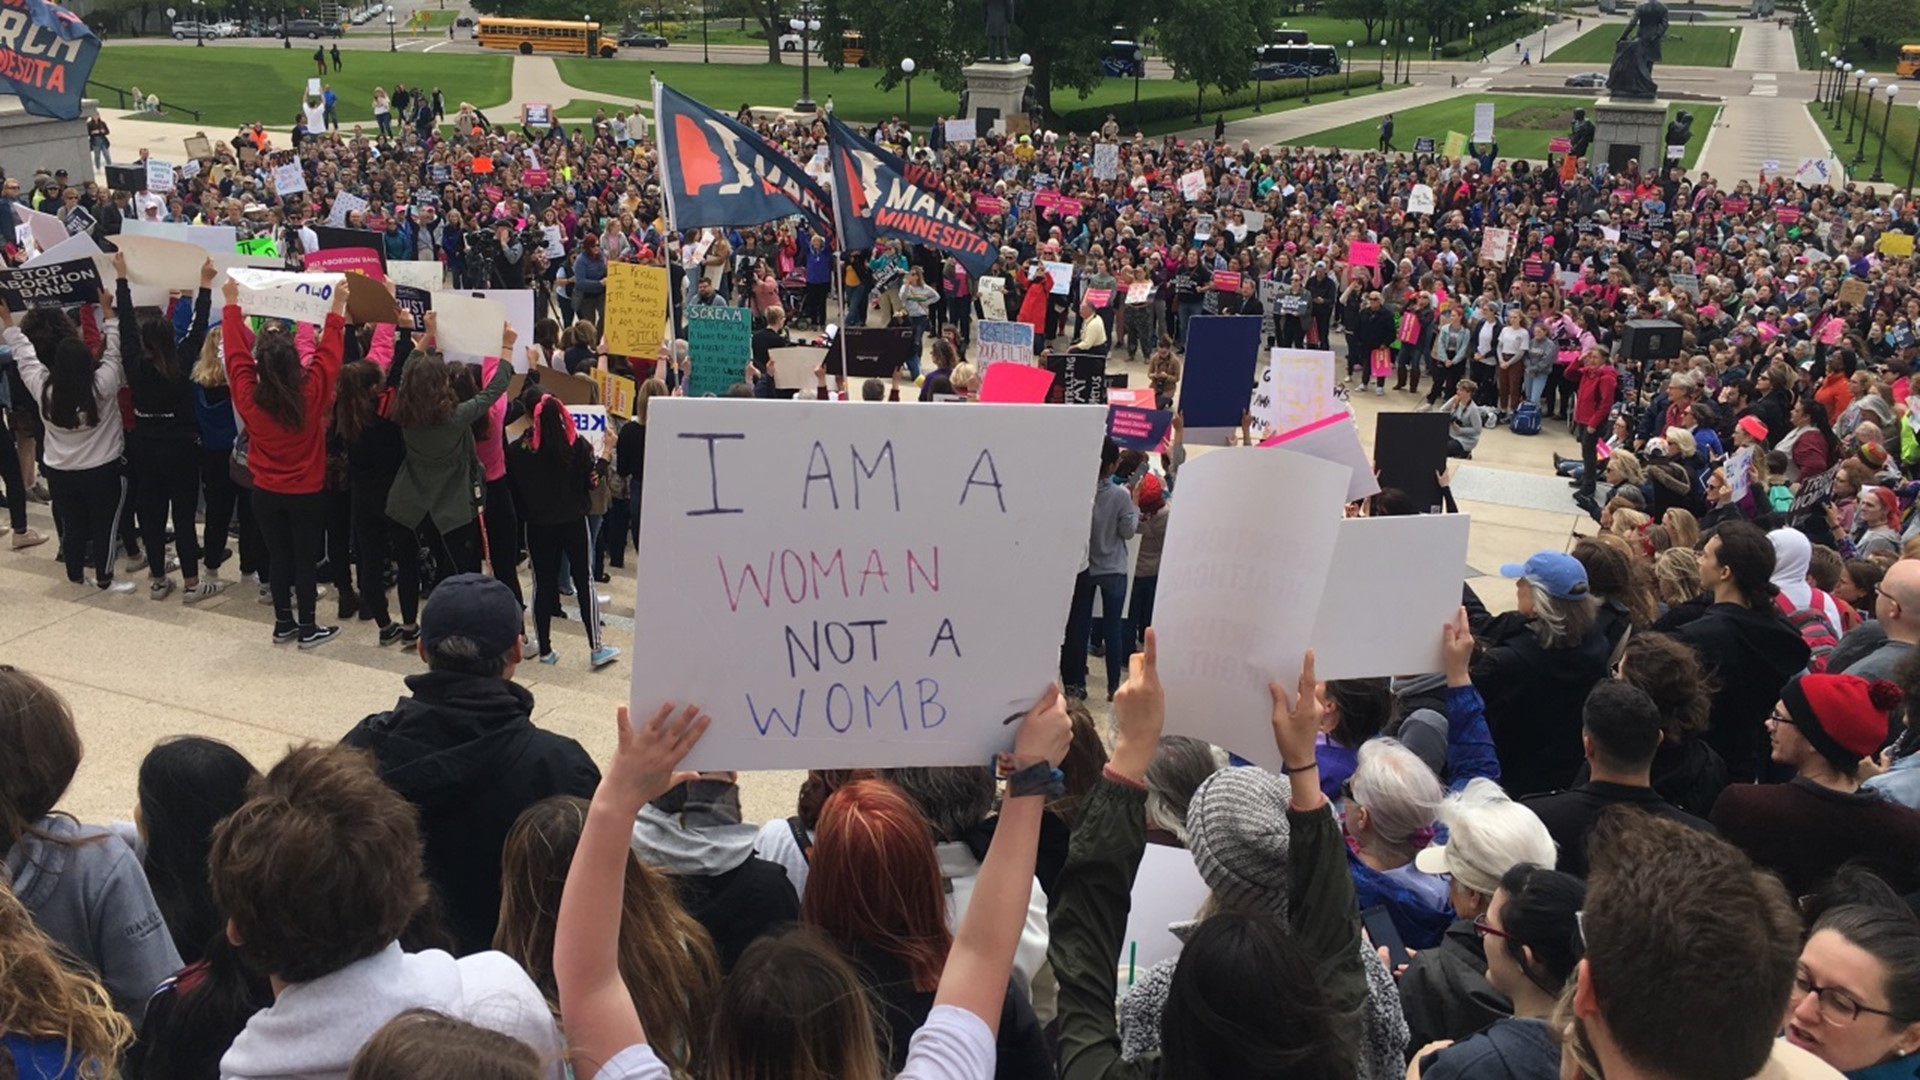 More than a thousand people gathered at the State Capitol Steps as part of the National Day of Action against abortion bans. As more states pass new restrictions, the odds are growing that the US Supreme Court will revisit the landmark Roe vs Wade decision that established women's rights to abortions.